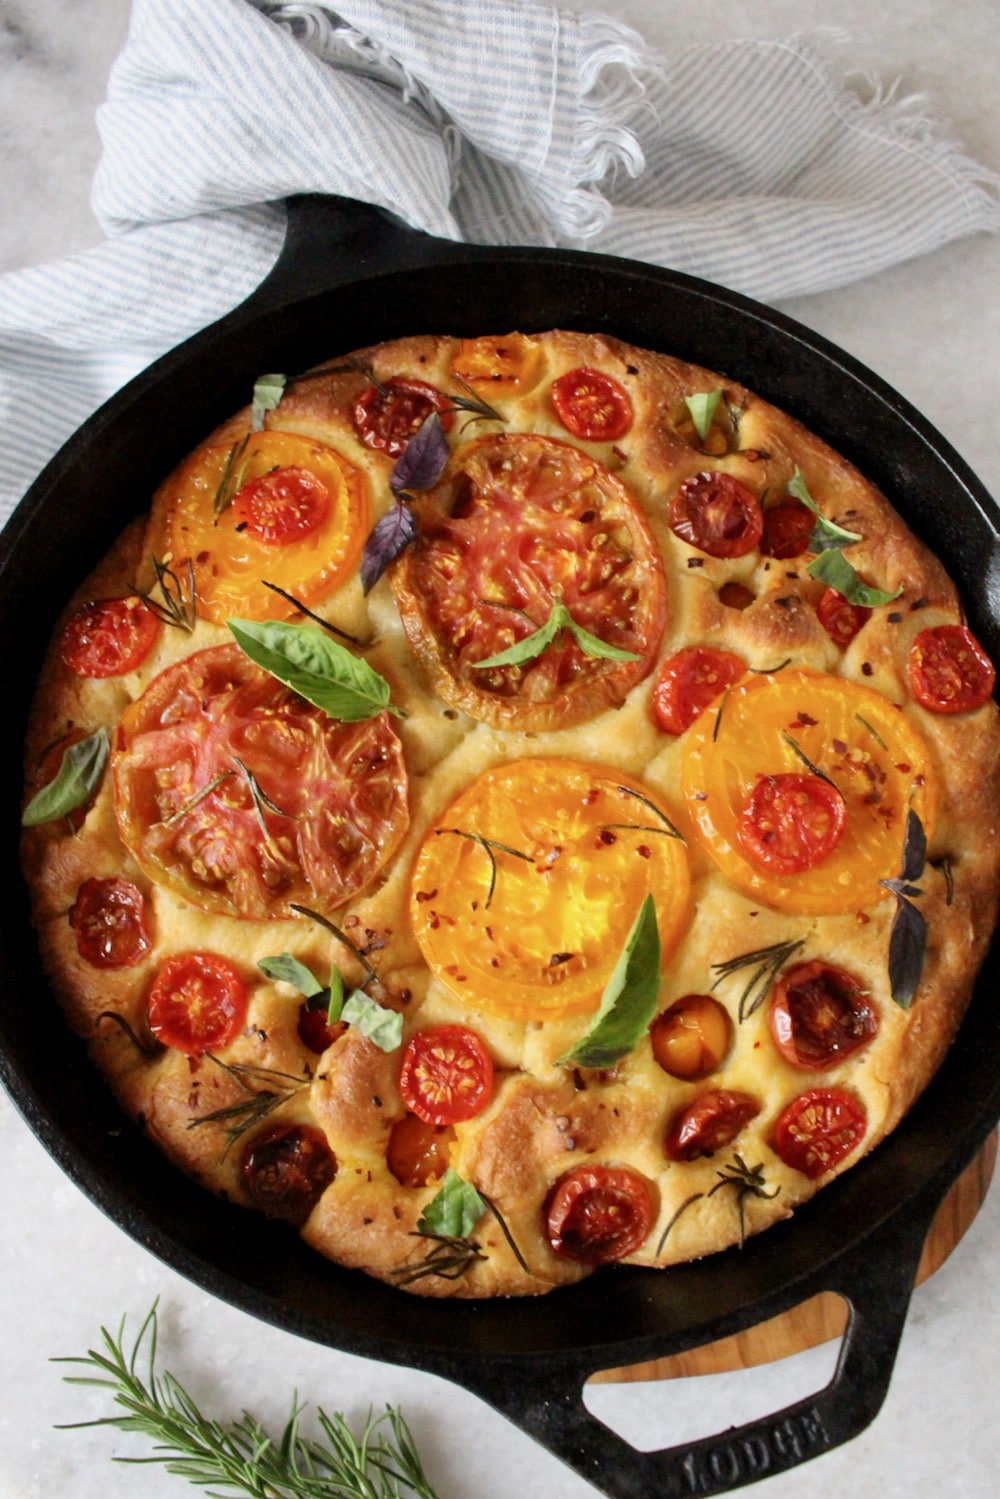 What pan is best for focaccia